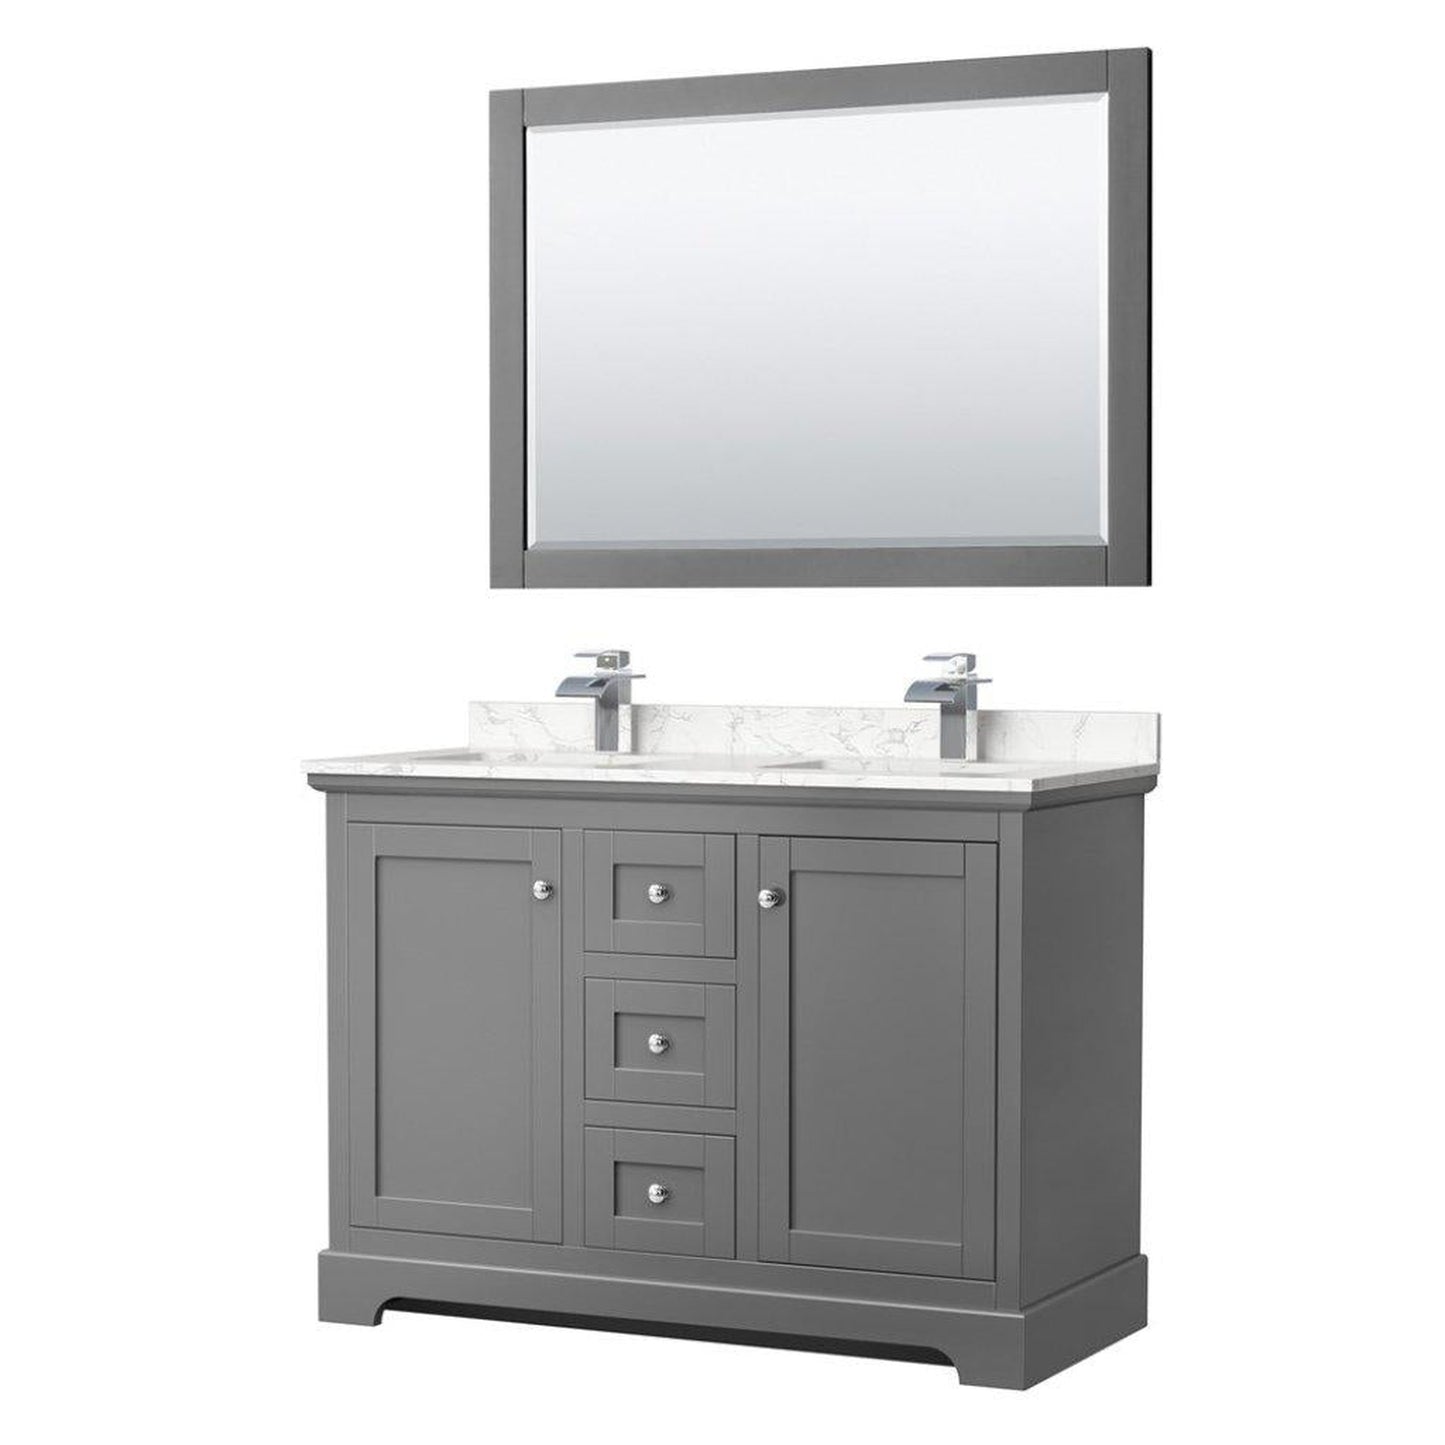 Wyndham Collection Avery 48" Dark Gray Double Bathroom Vanity Set With Dark-Vein Cultured Marble Countertop With 1-Hole Faucet And Square Sink And 46" Mirror